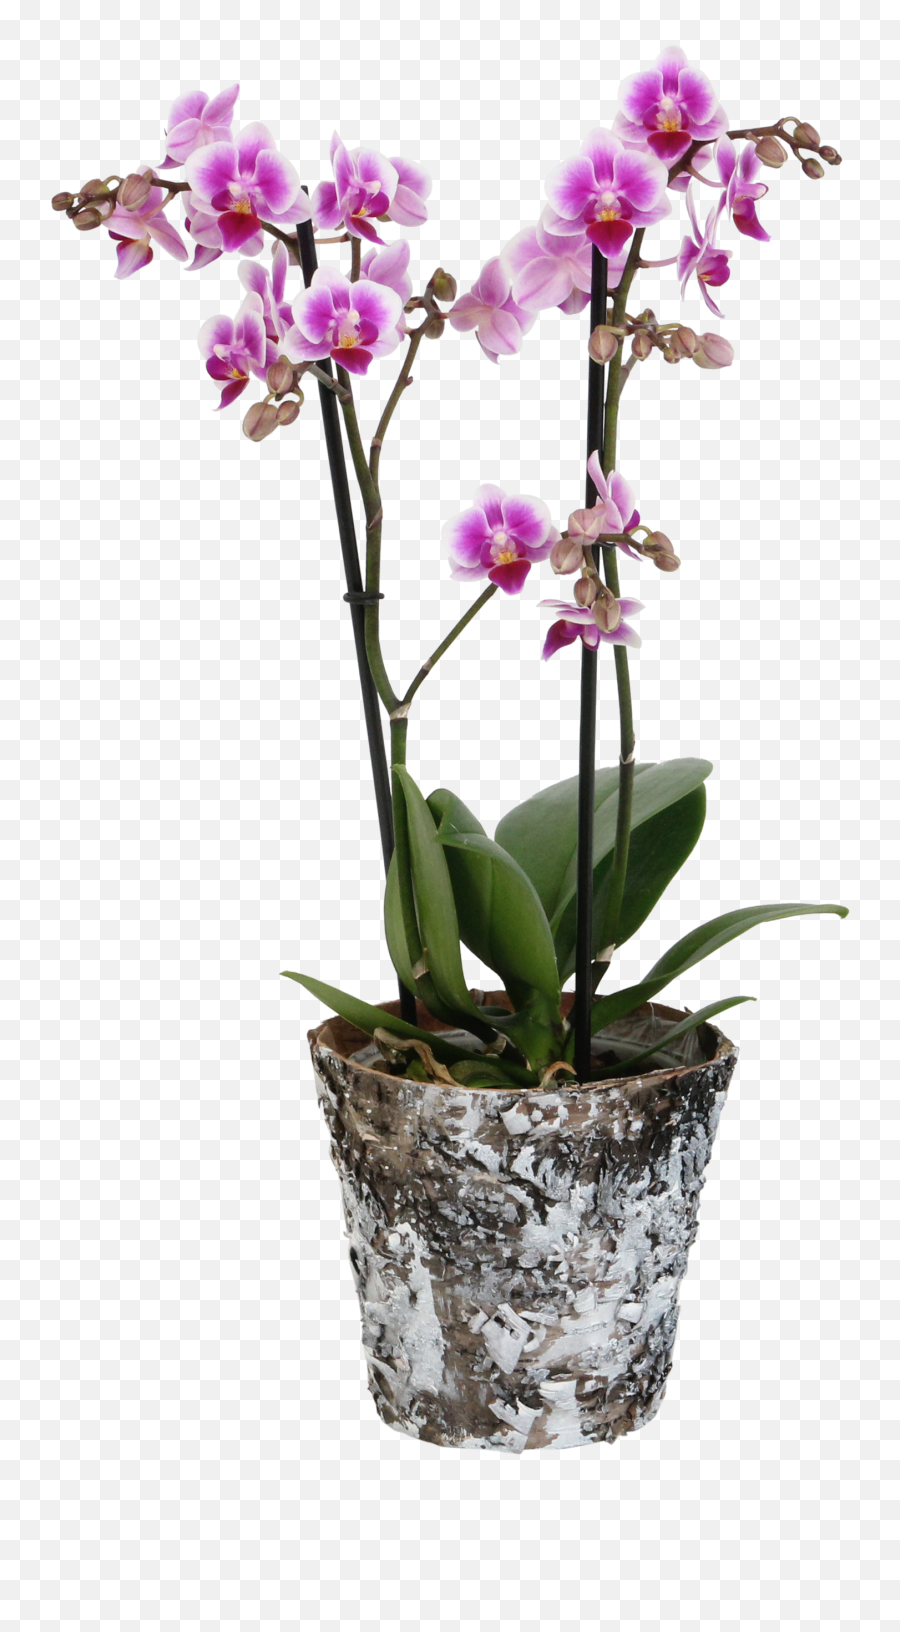 Orchid U2013 Butterfly Orchid In Real Wood Plant Pot As A Set U2013 Height 45 Cm 2 Stems Pink - White Flowers Emoji,White Flowers Transparent